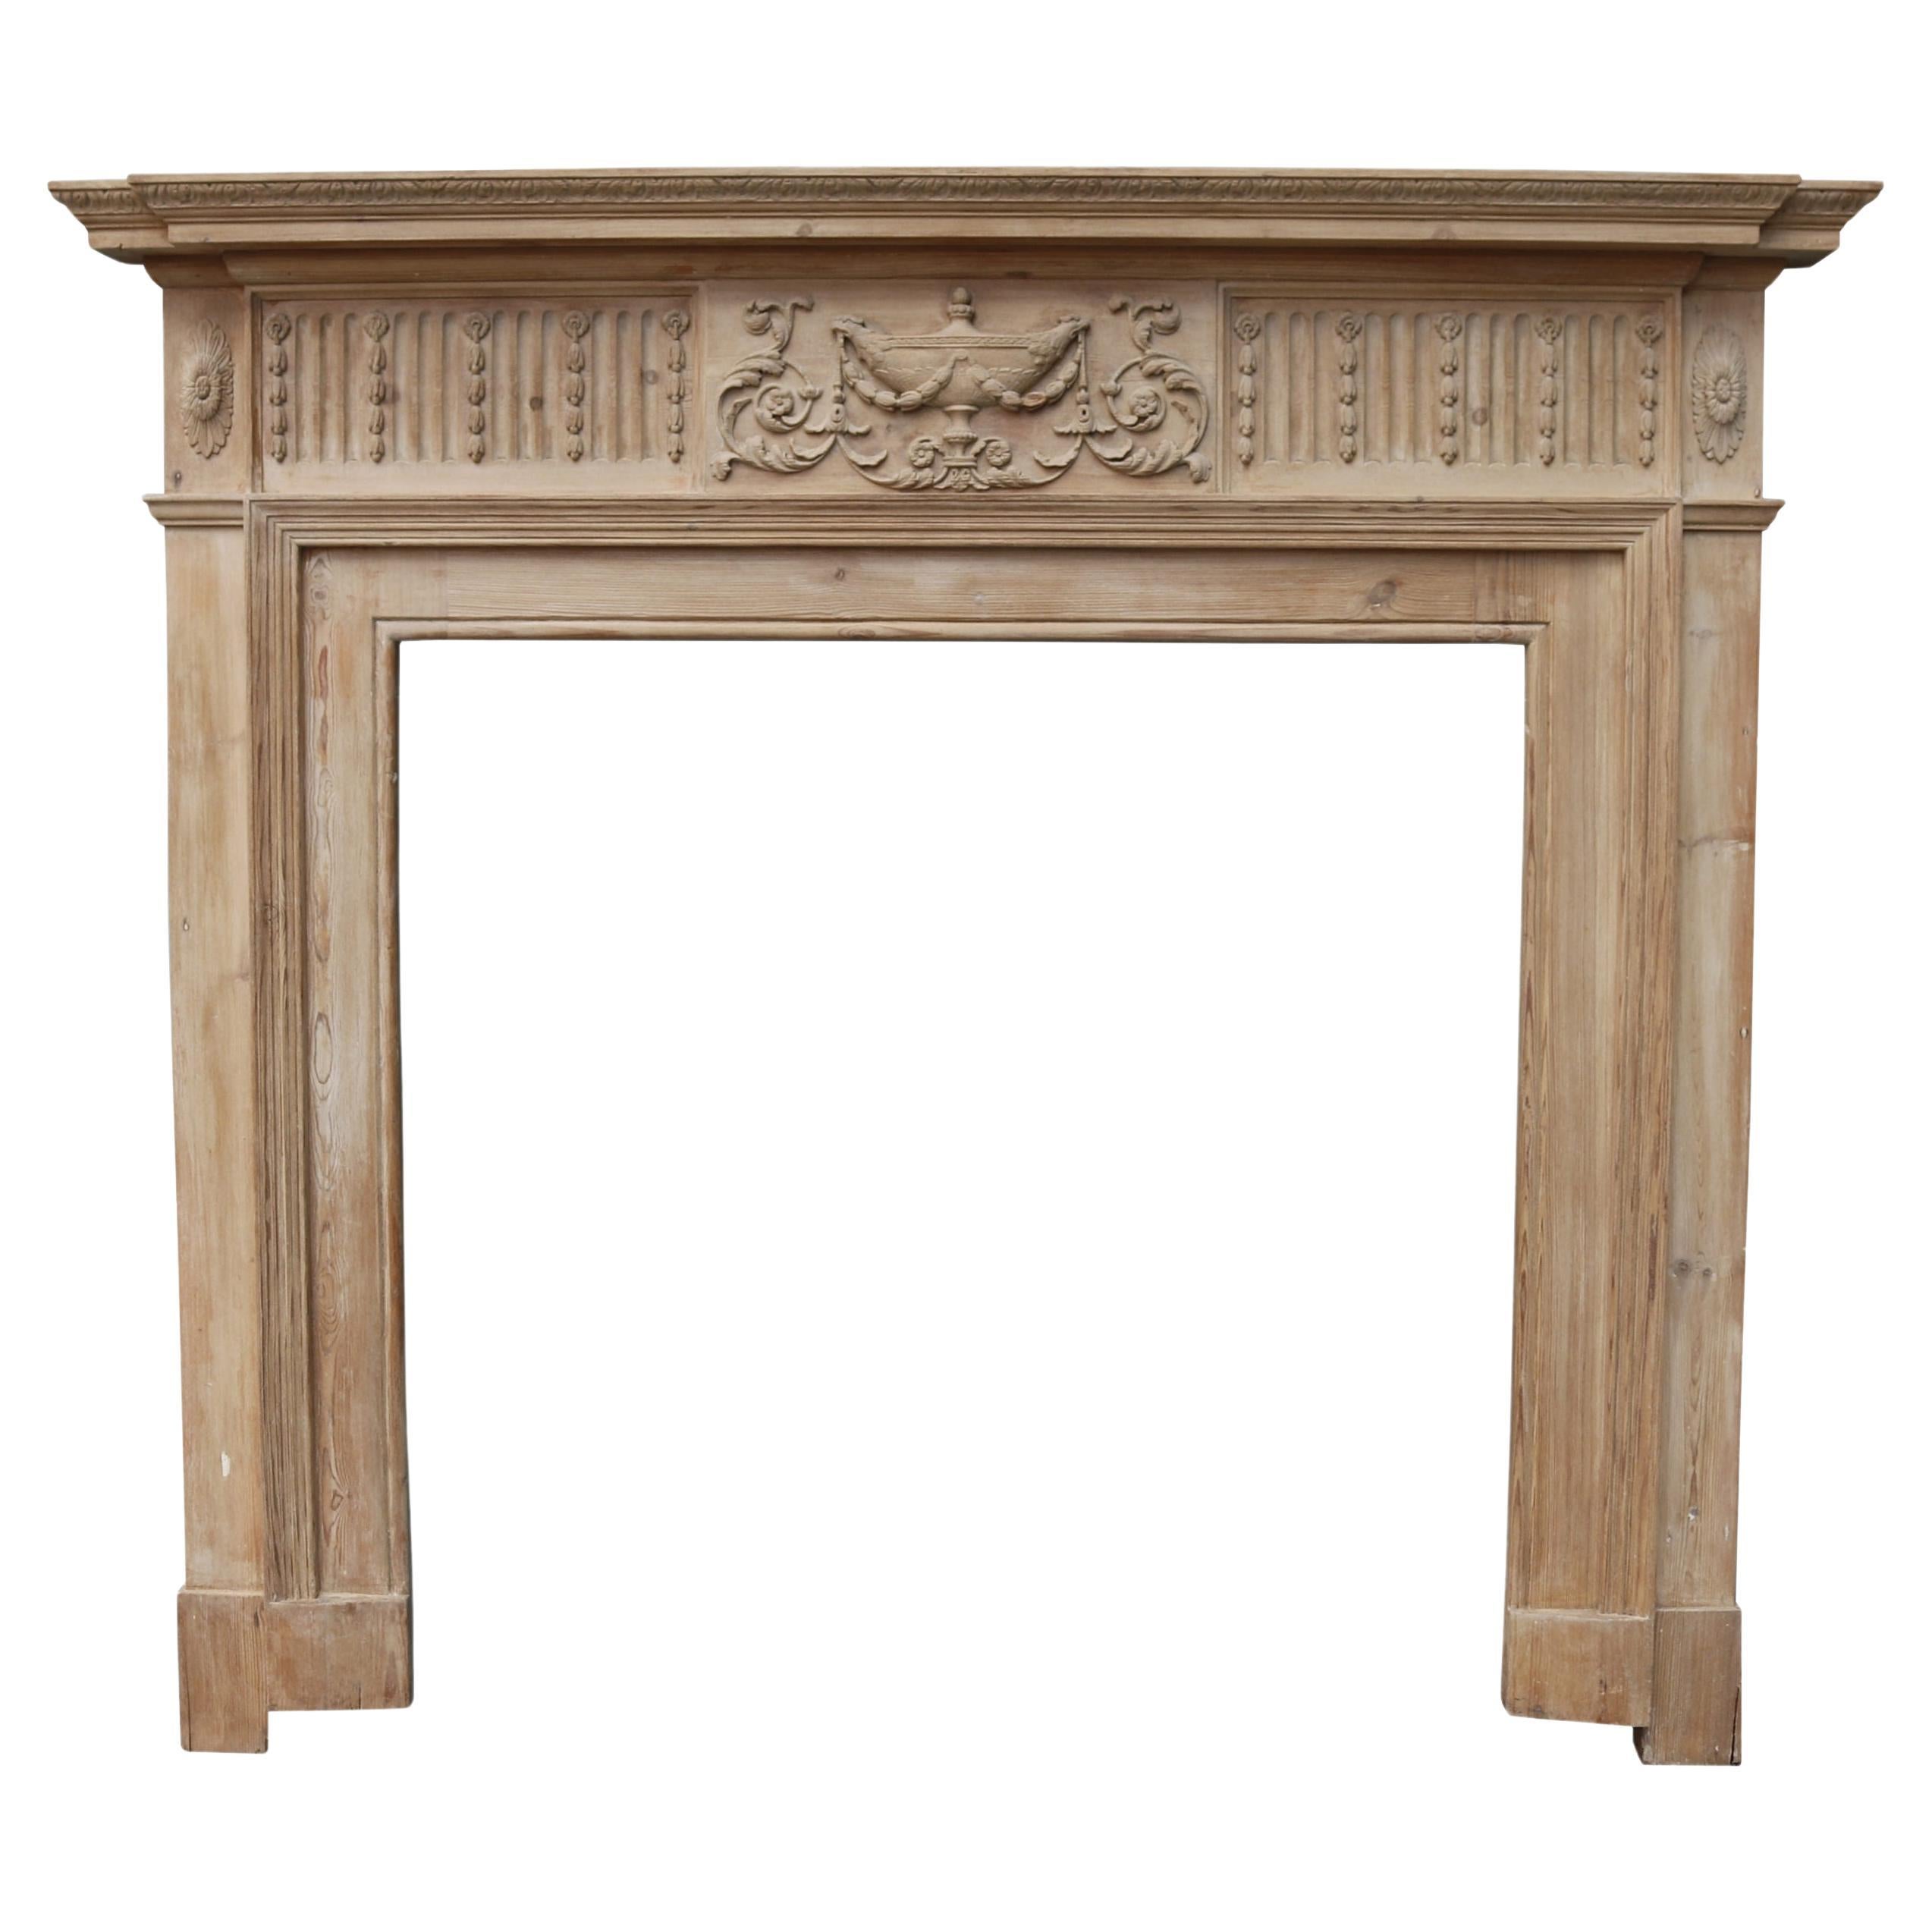 Antique Neoclassical Style Carved Fire Mantel